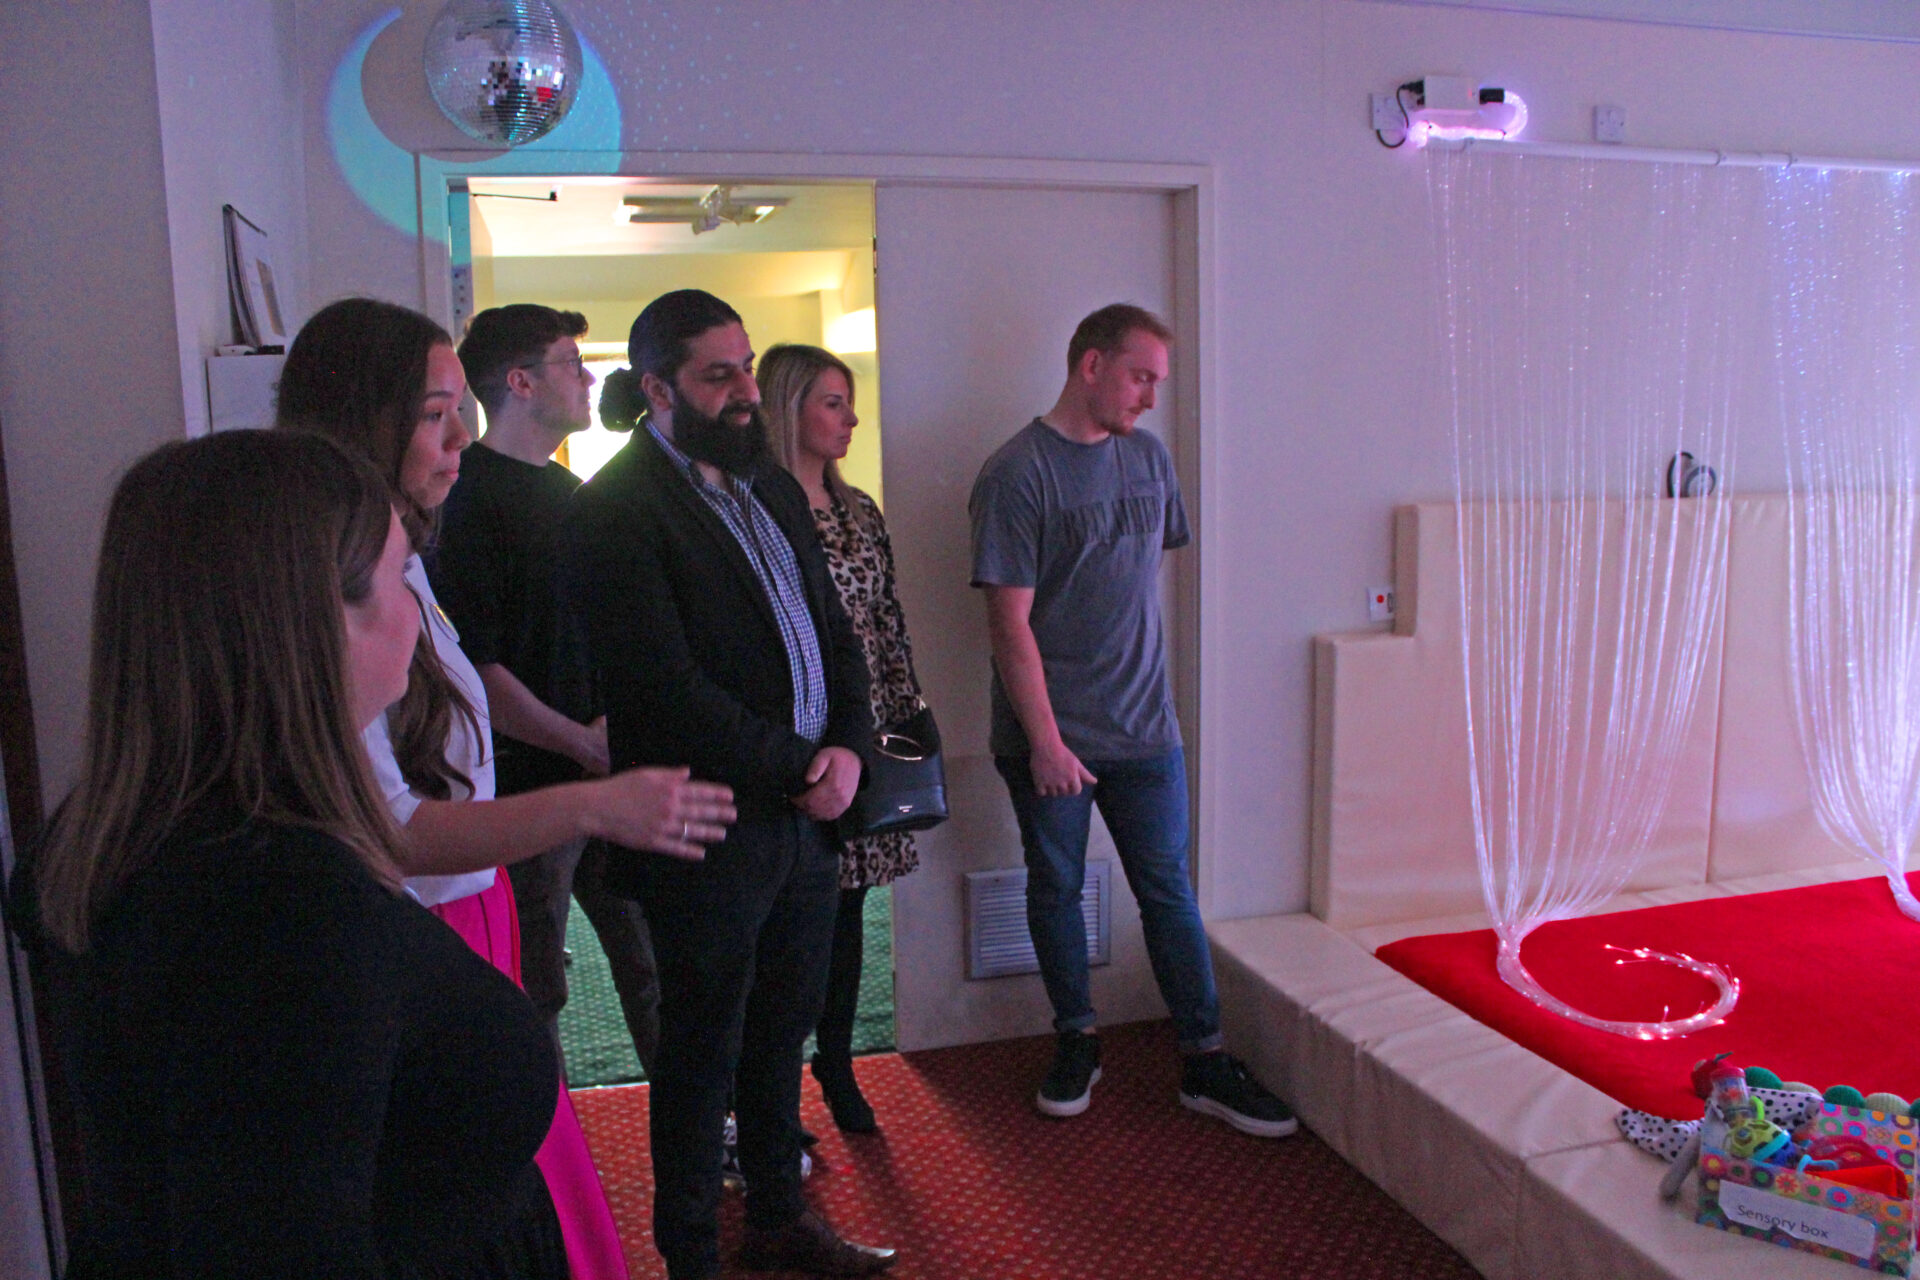 People looking at a sensory room with different coloured lighting